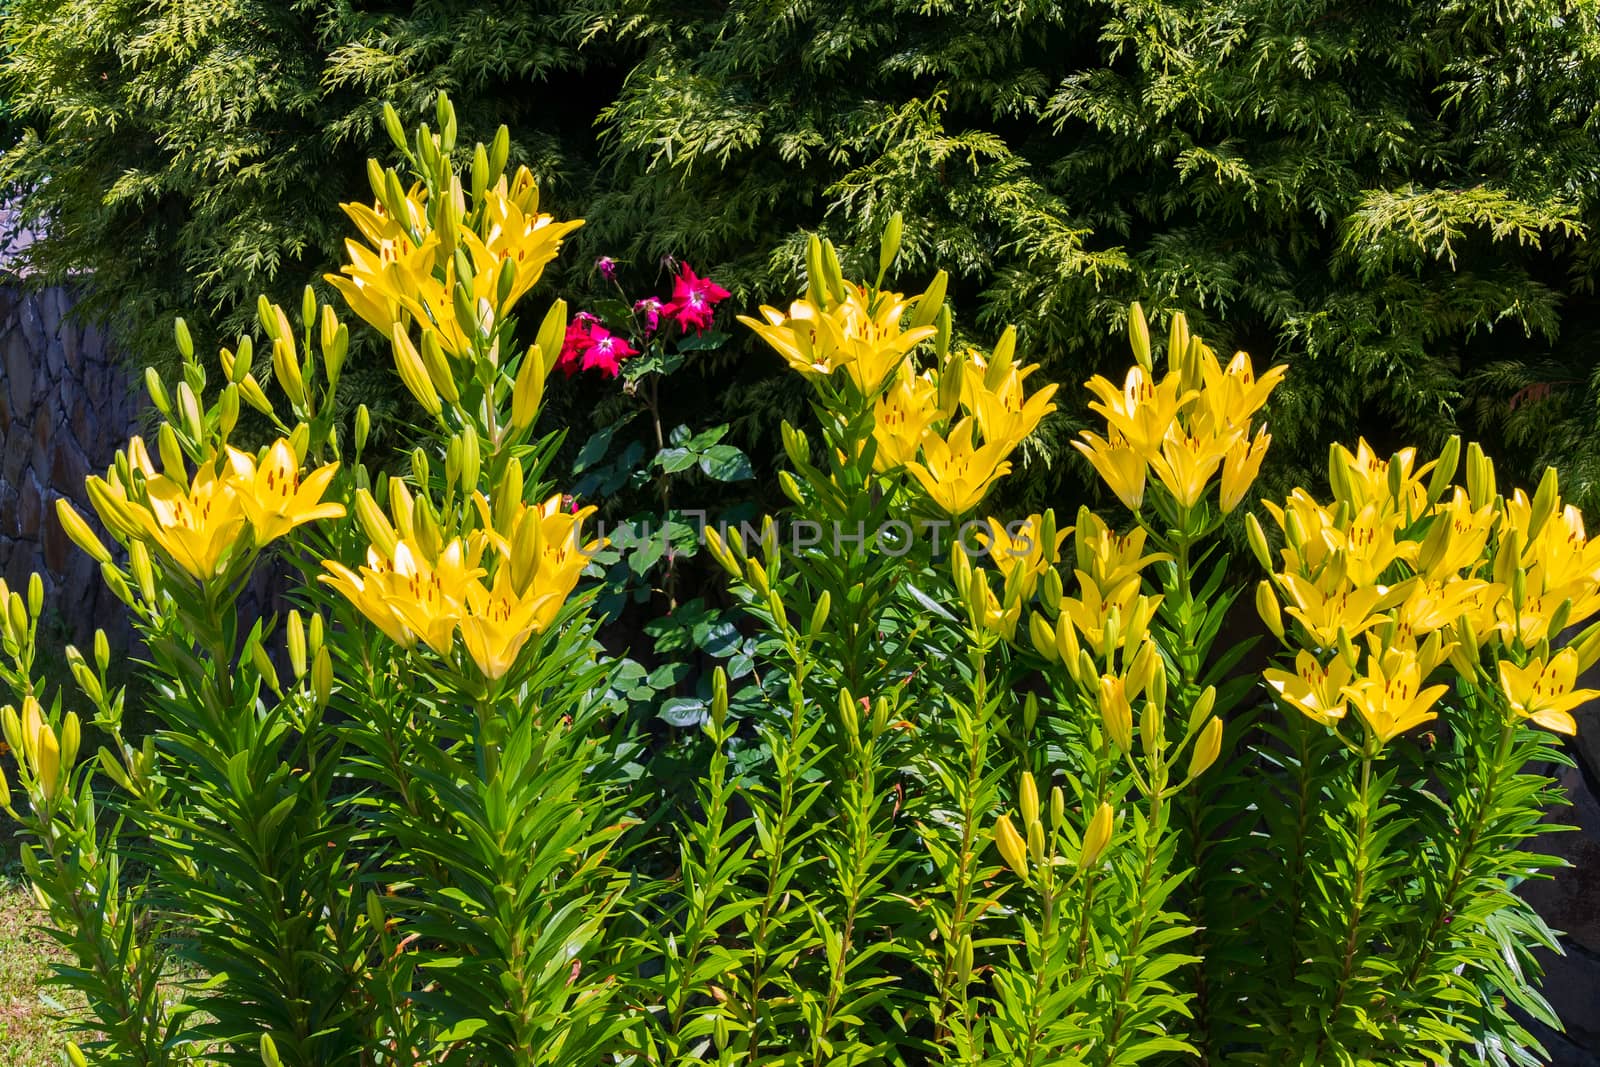 Charming yellow lilies growing in a garden with petals stretching towards the sun and high green stems.